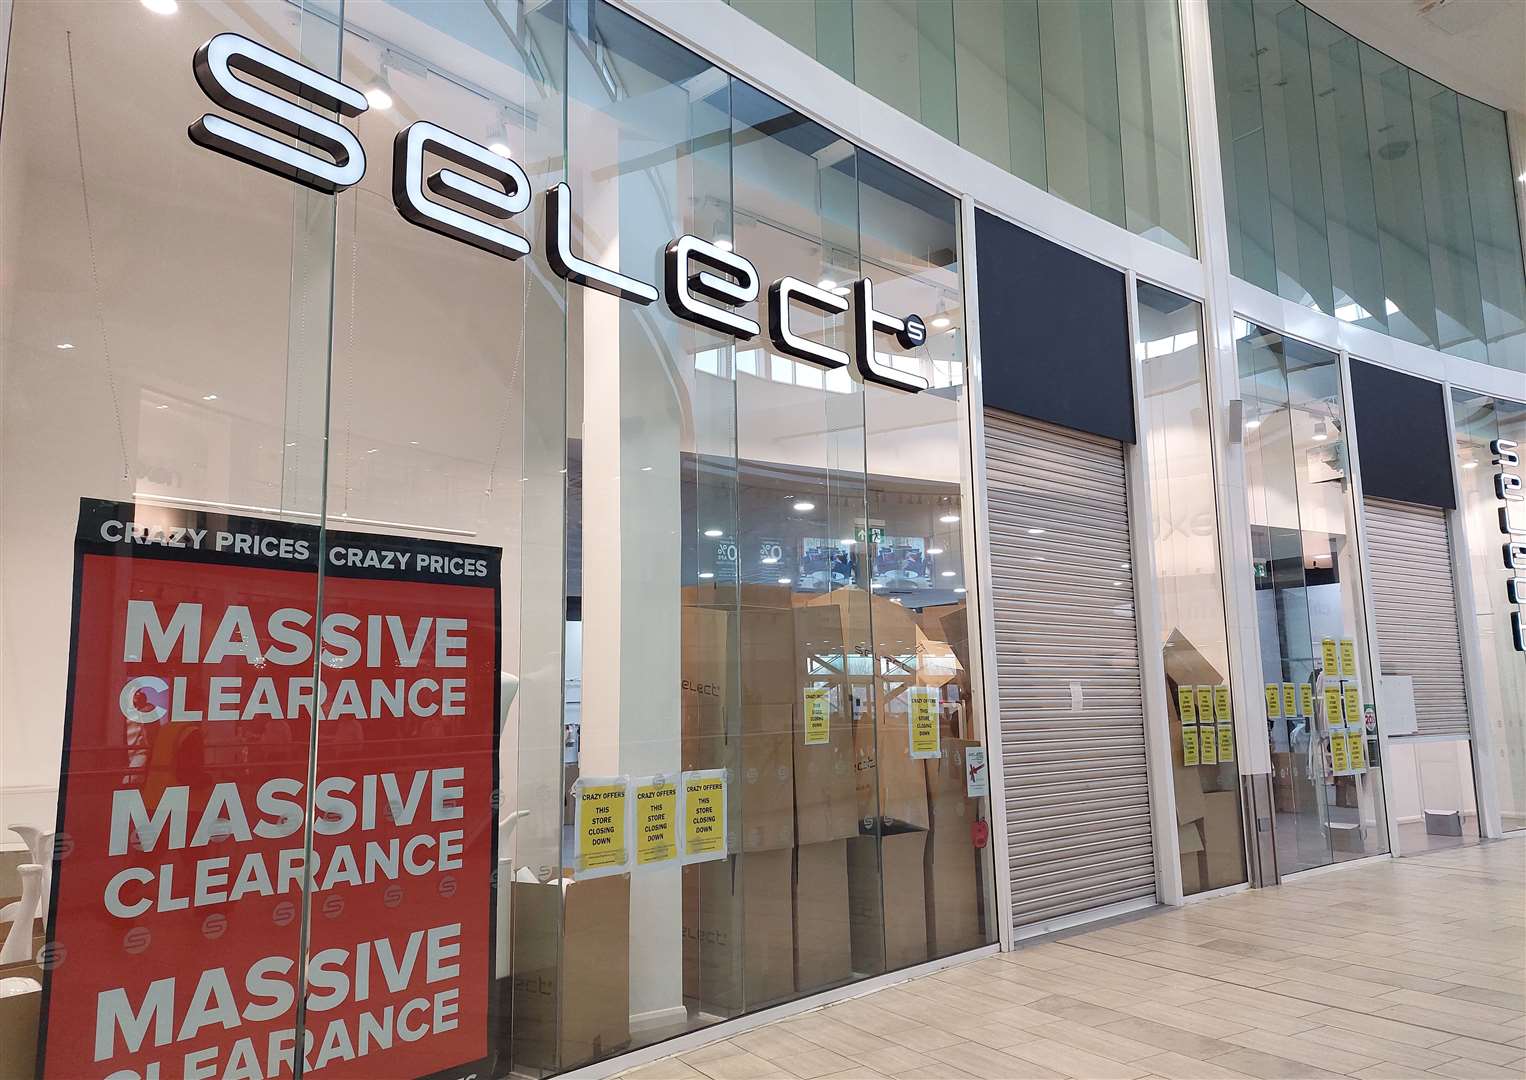 Select in County Square has now closed in the centre’s extension